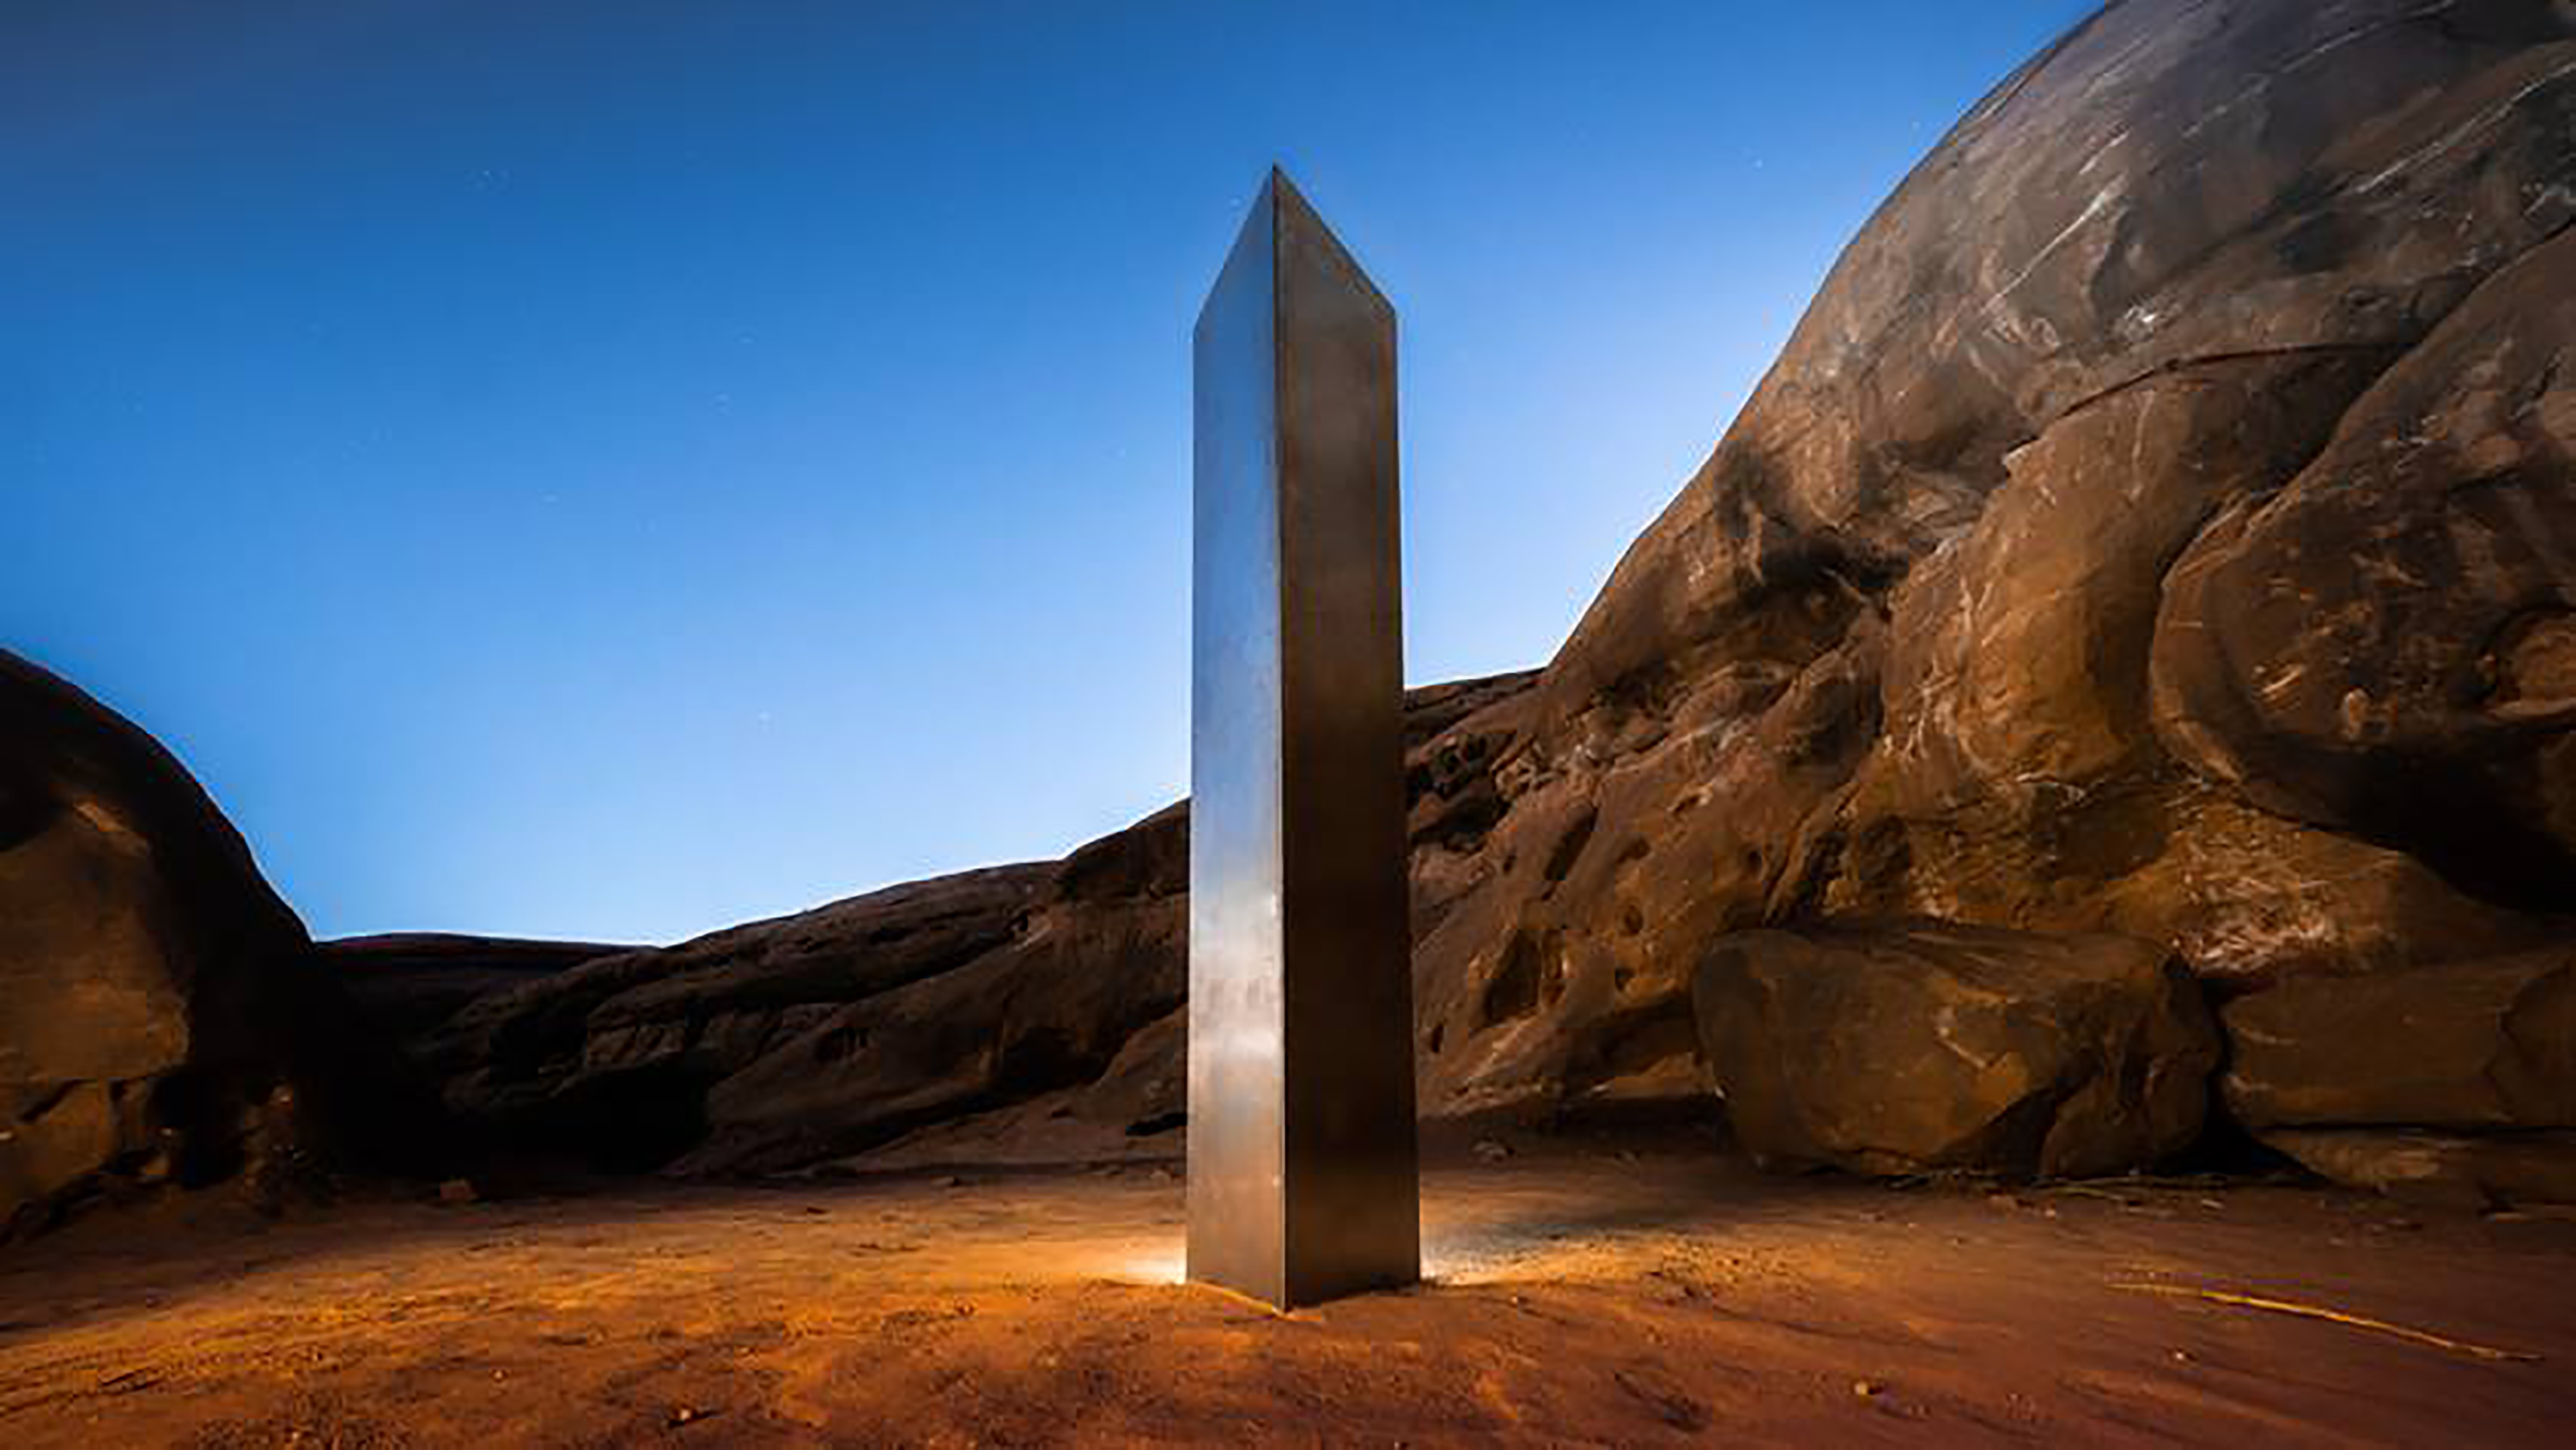 Is the Utah monolith this year's viral art moment? - CNN Style